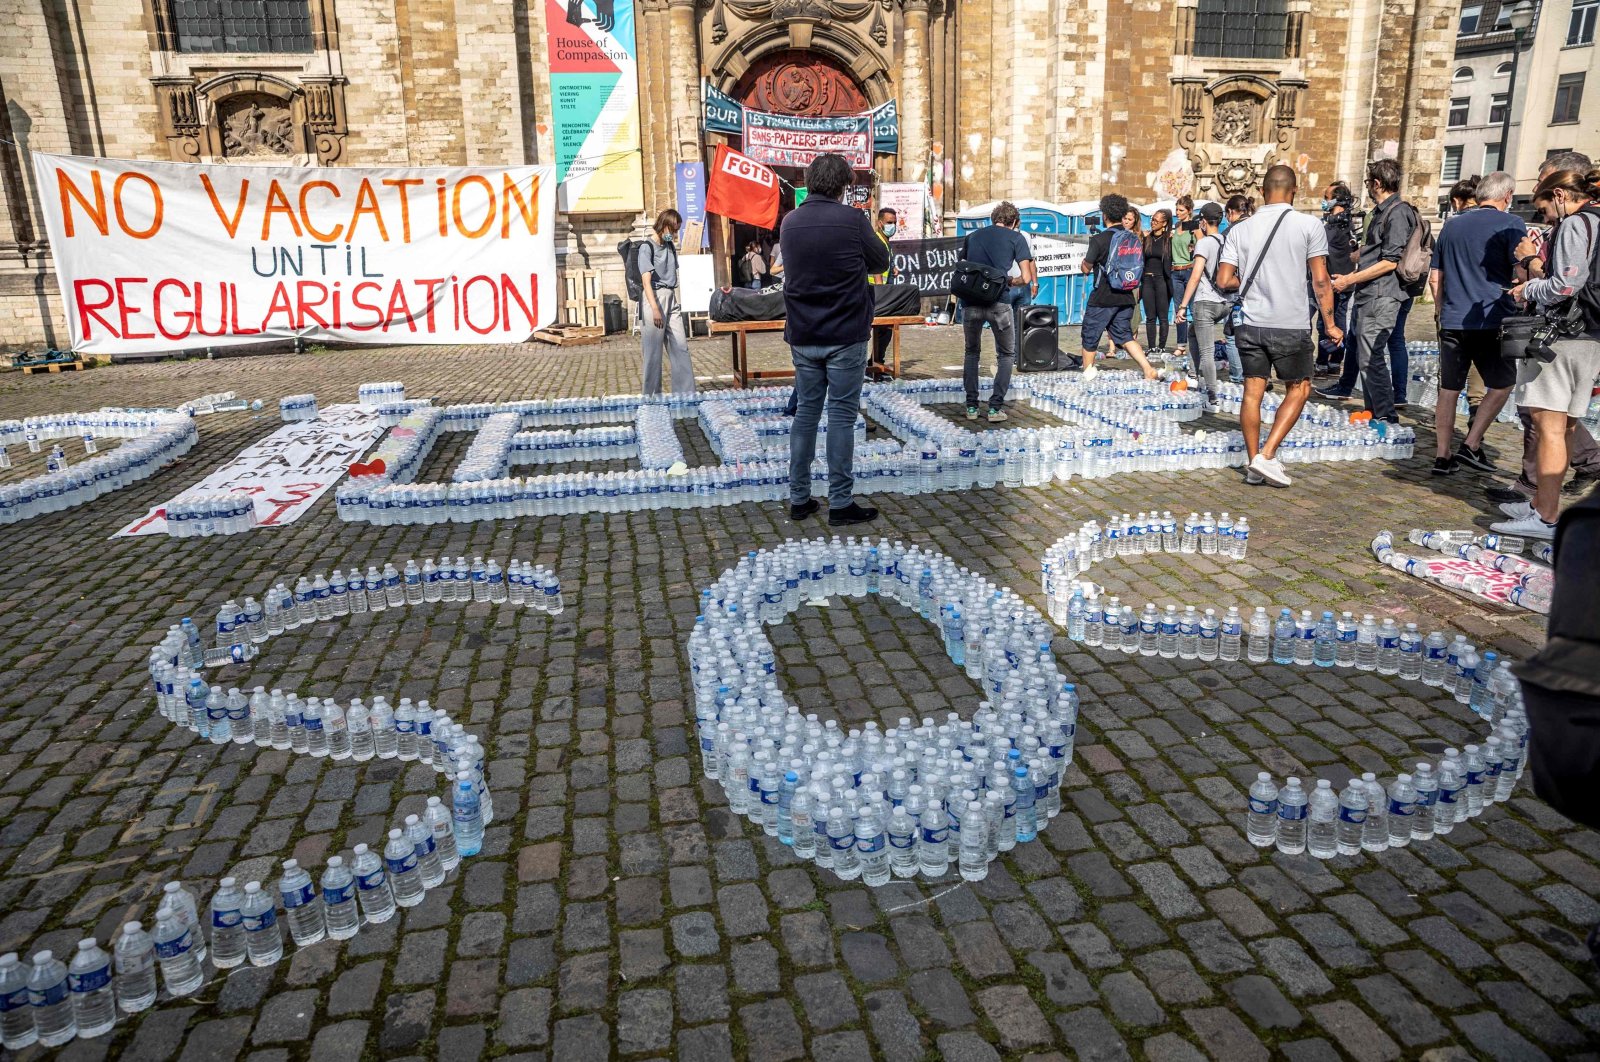 The words "help" and "SOS" are spelled with water bottles during a demonstration in front of the Saint John the Baptist at the Beguinage church, occupied by undocumented immigrants, Brussels, Belgium, July 19, 2021. (AFP Photo)